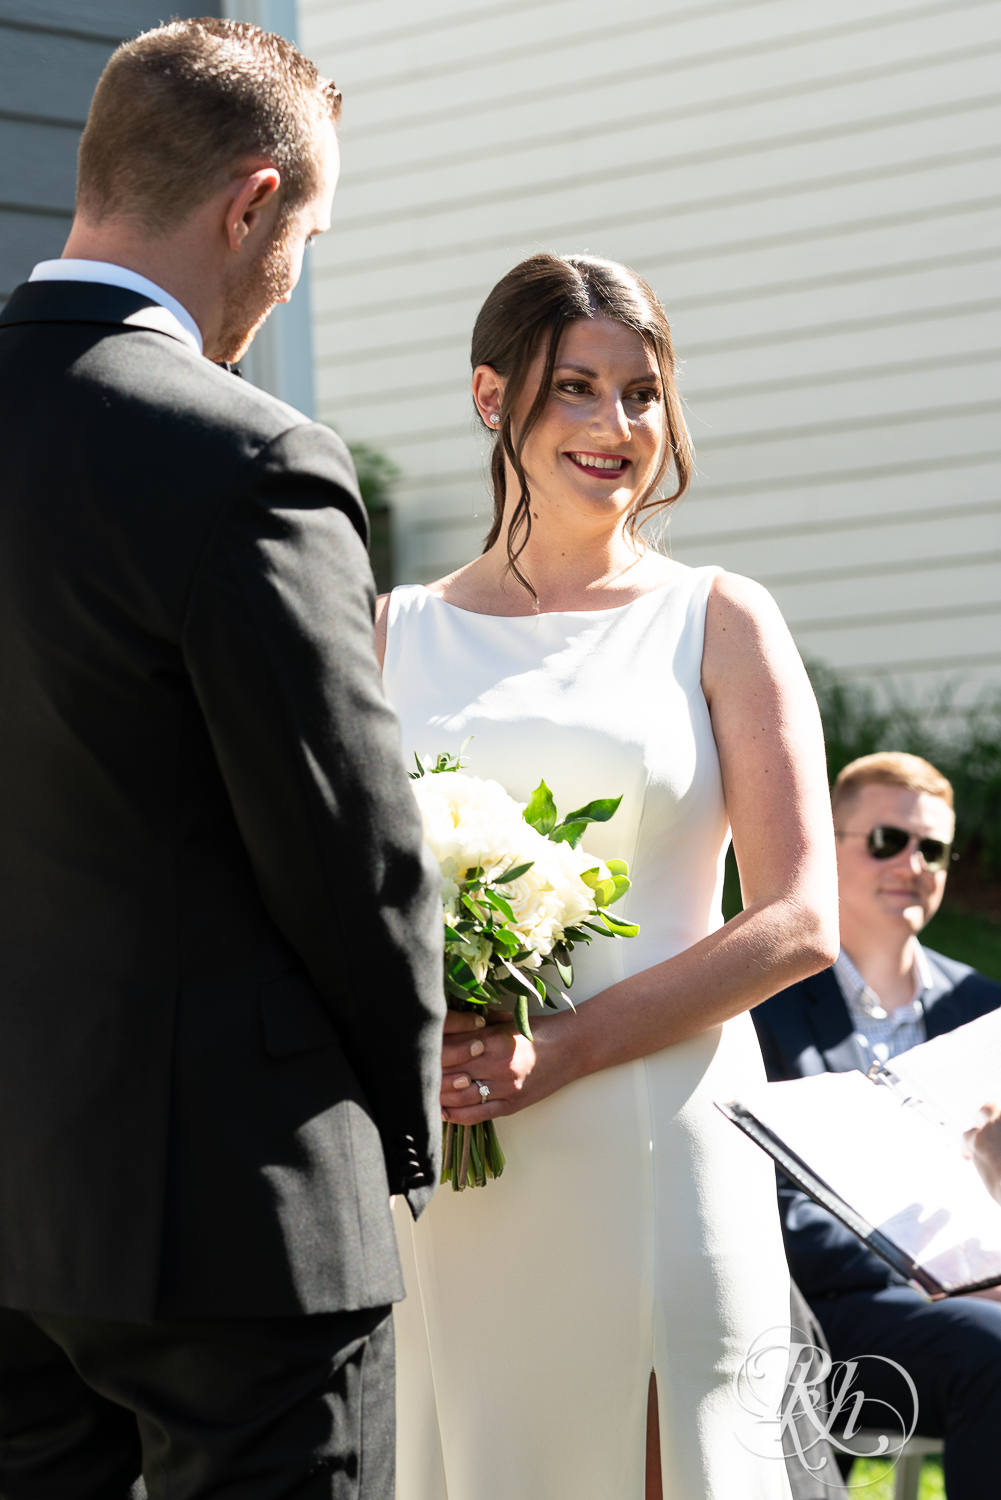 Bride and groom smiling at wedding ceremony at home in Eagan, Minnesota.